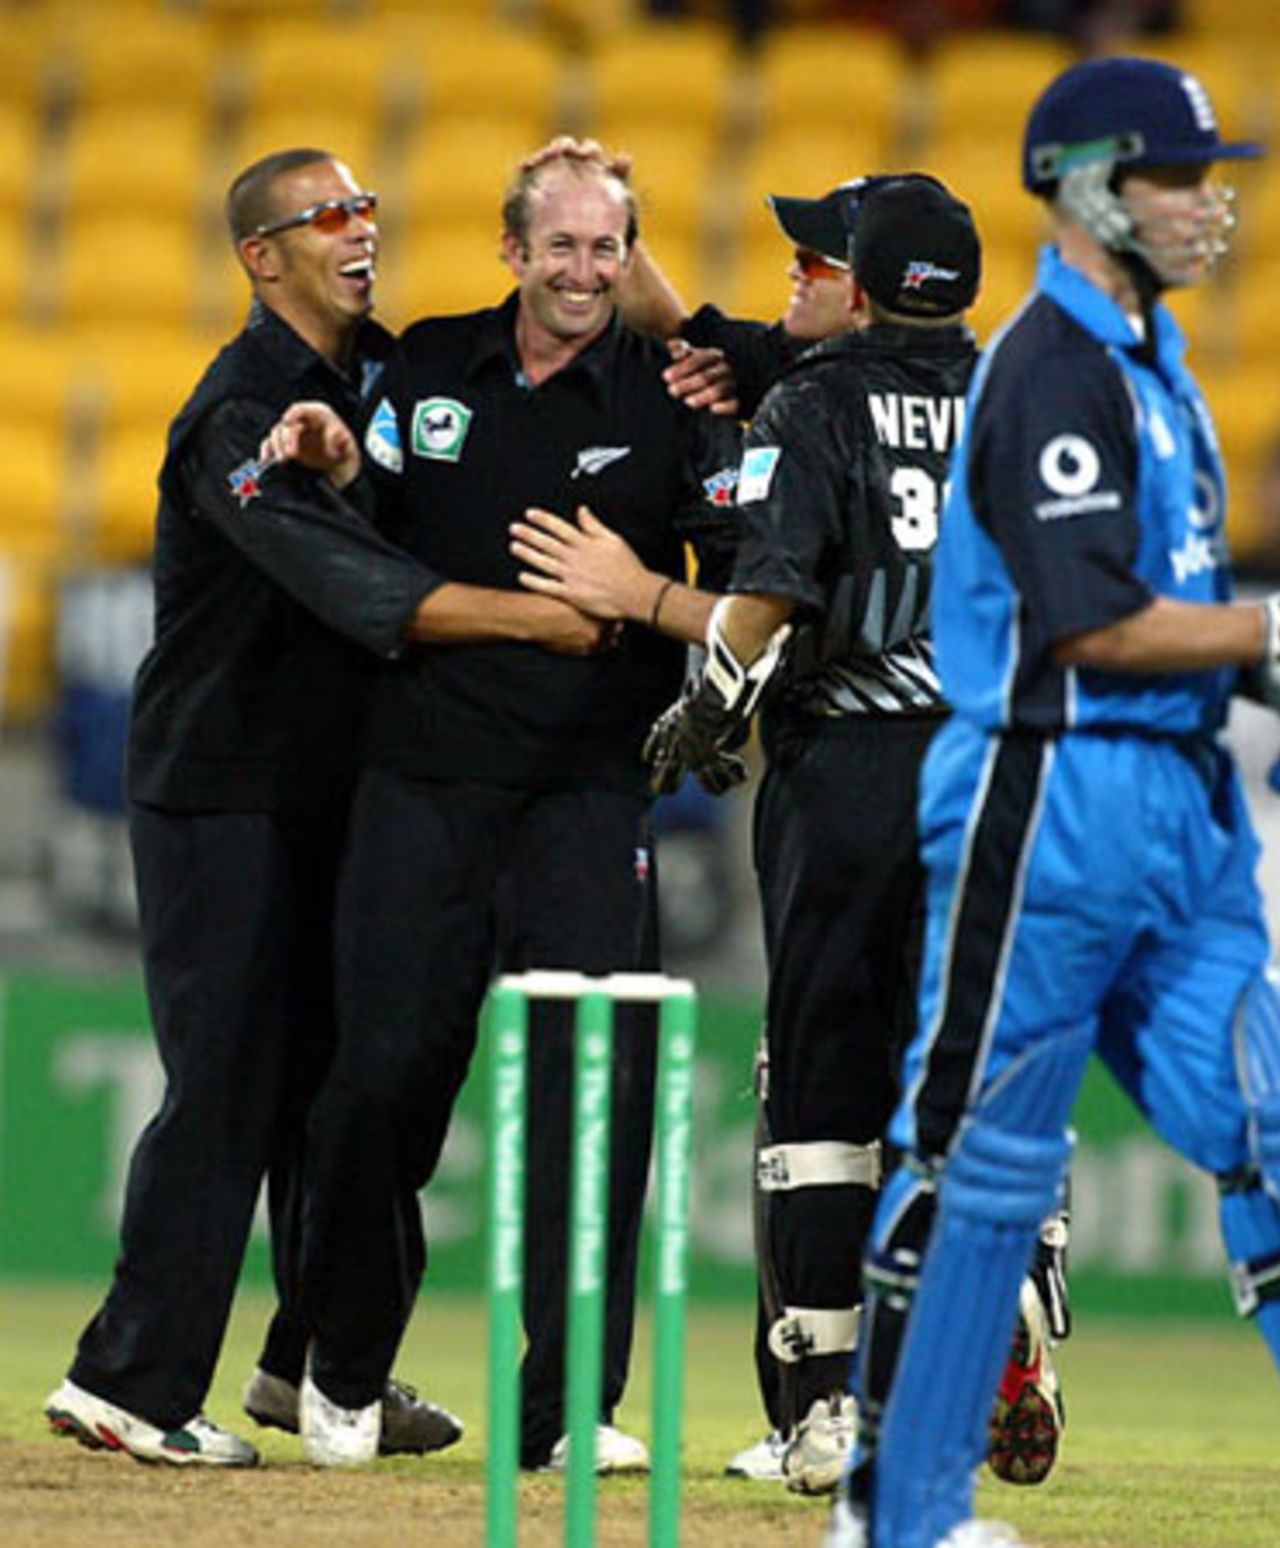 New Zealand bowler Chris Harris (second from left) is congratulated by team-mates after dismissing England batsman Craig White, lbw for 11. From left, Andre Adams, Lou Vincent (obscured) and Chris Nevin. 2nd ODI: New Zealand v England at WestpacTrust Stadium, Wellington, 16 February 2002.